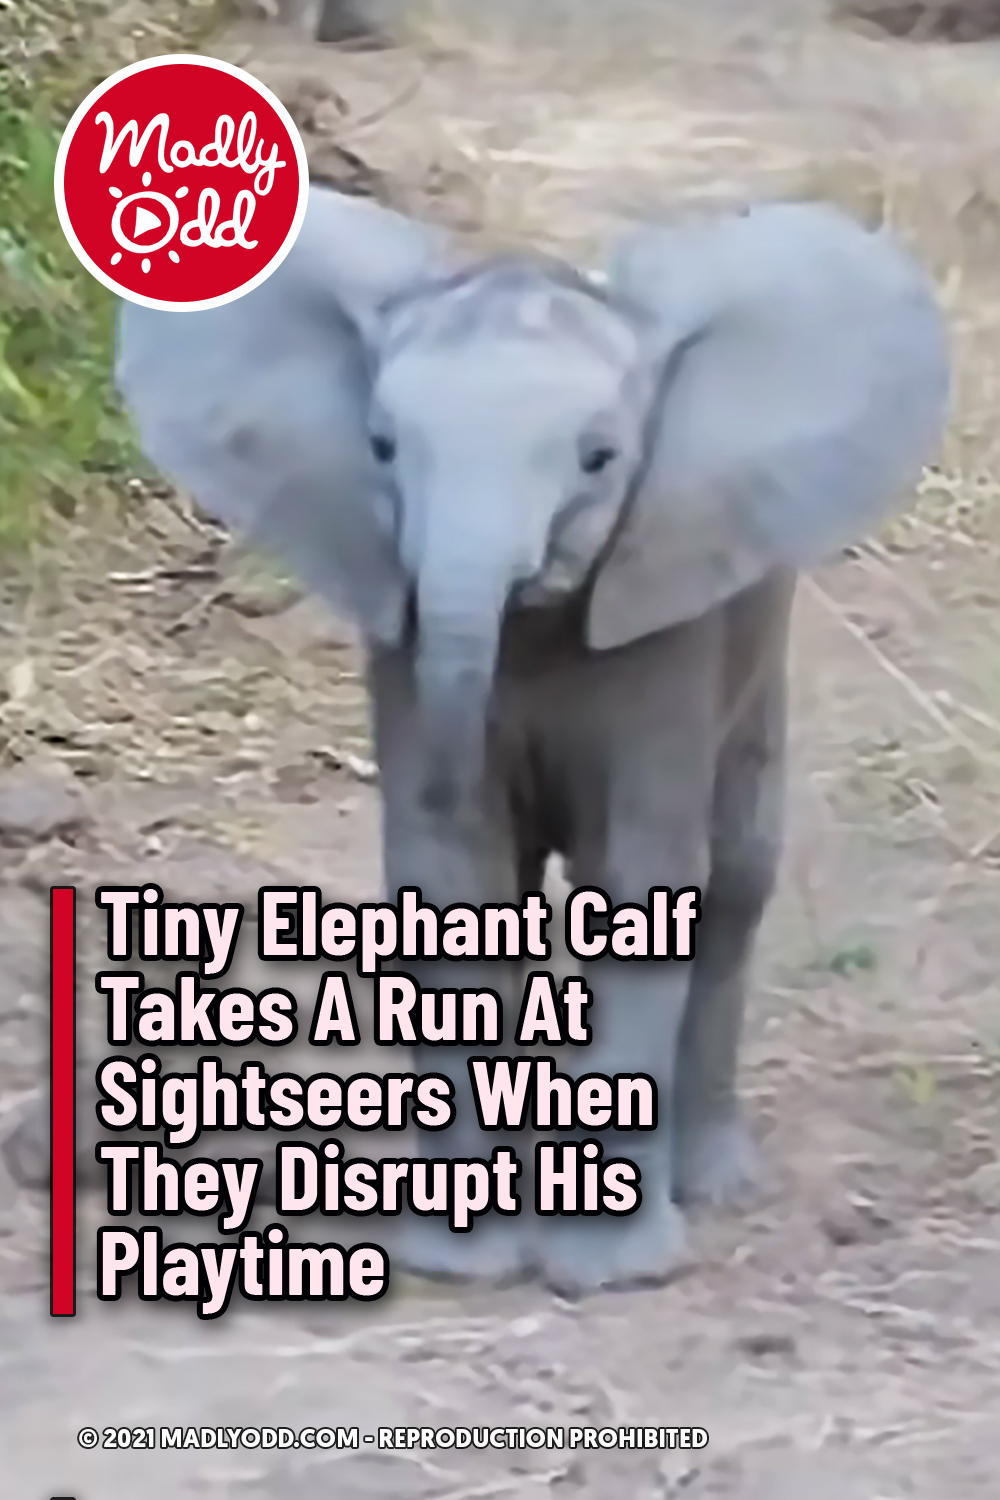 Tiny Elephant Calf Takes A Run At Sightseers When They Disrupt His Playtime